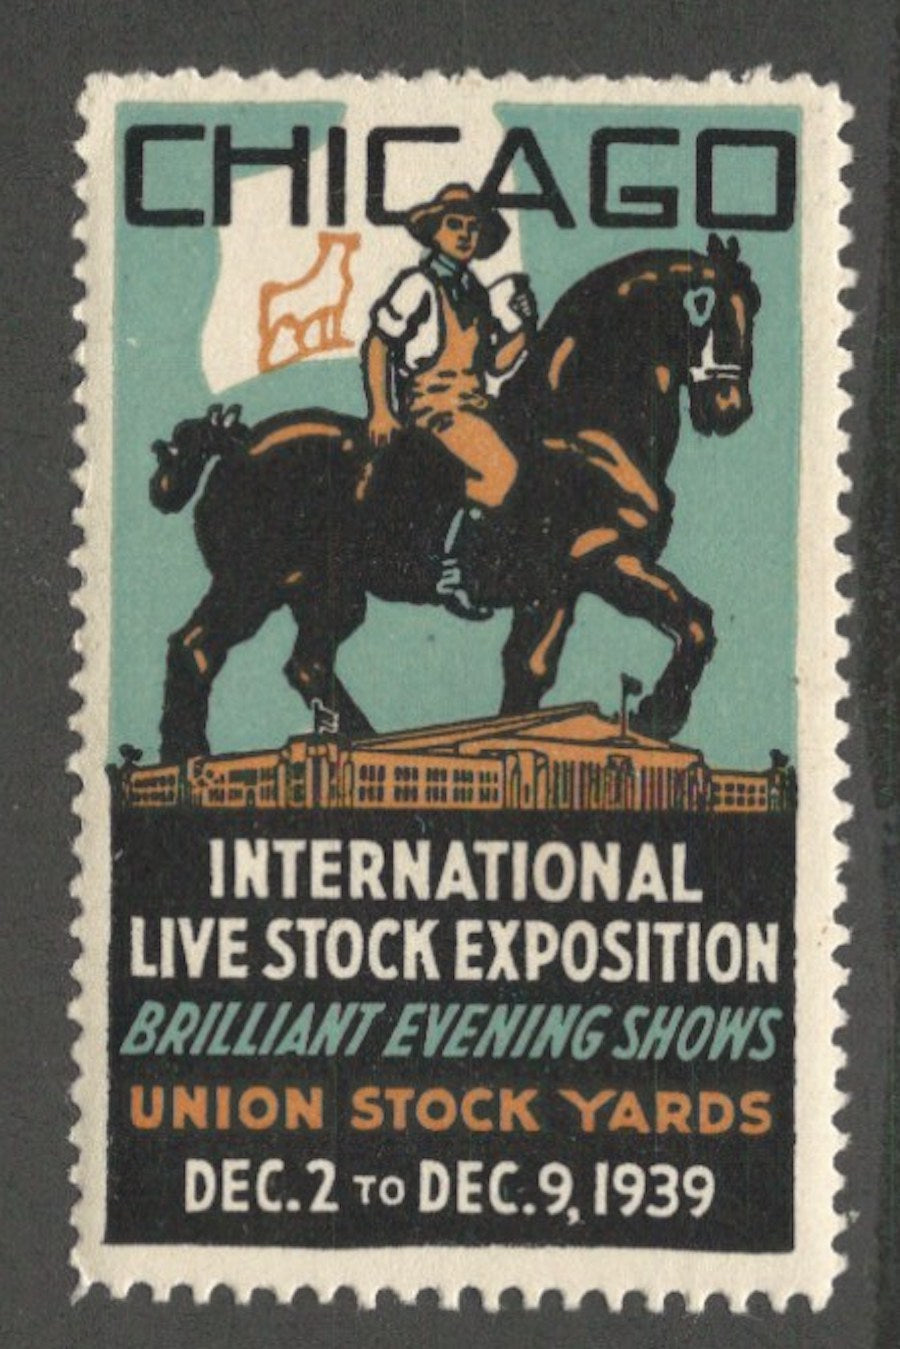 International Live Stock Exposition, Union Stock Yards, Chicago, IL, 1939, Poster Stamp